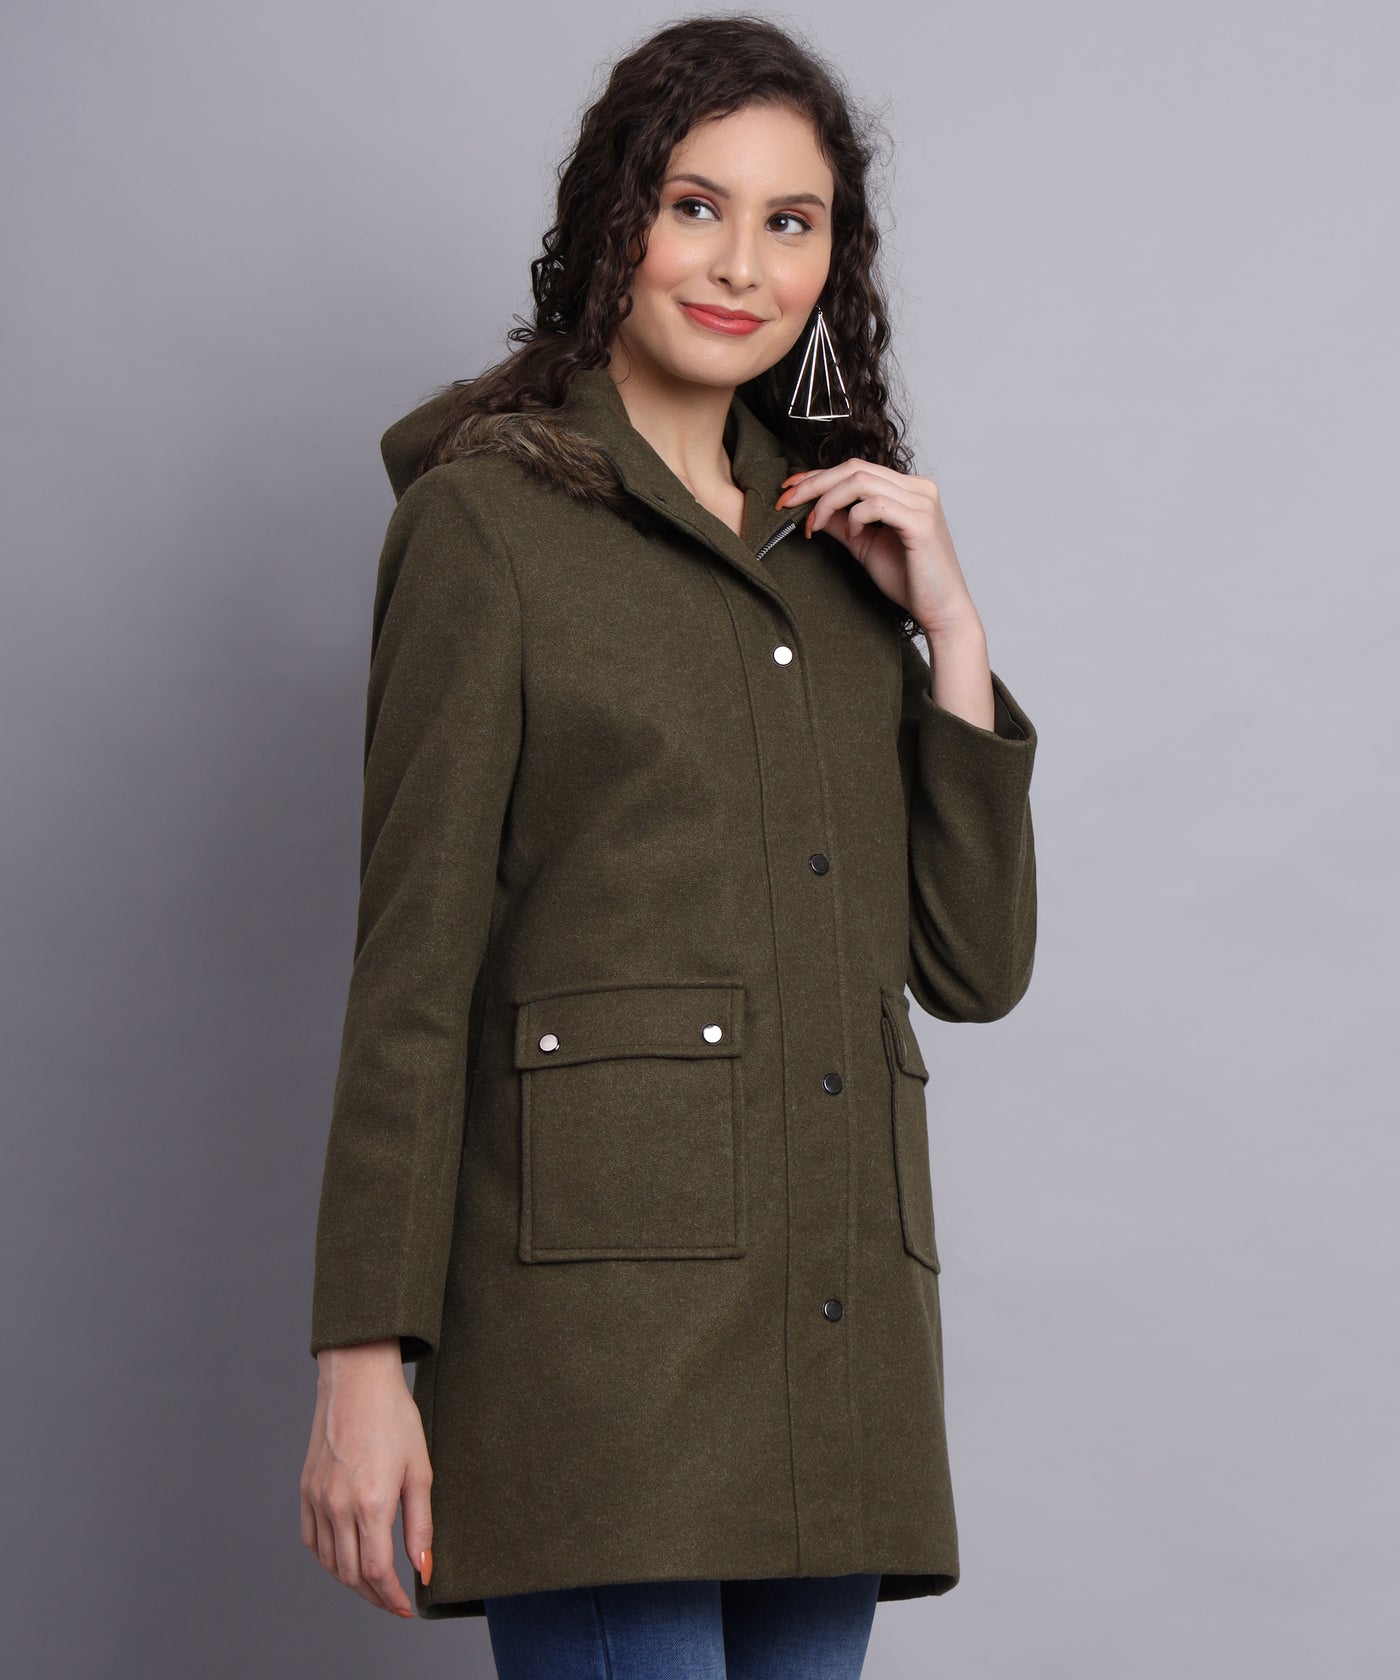 AW6223-OLIVE